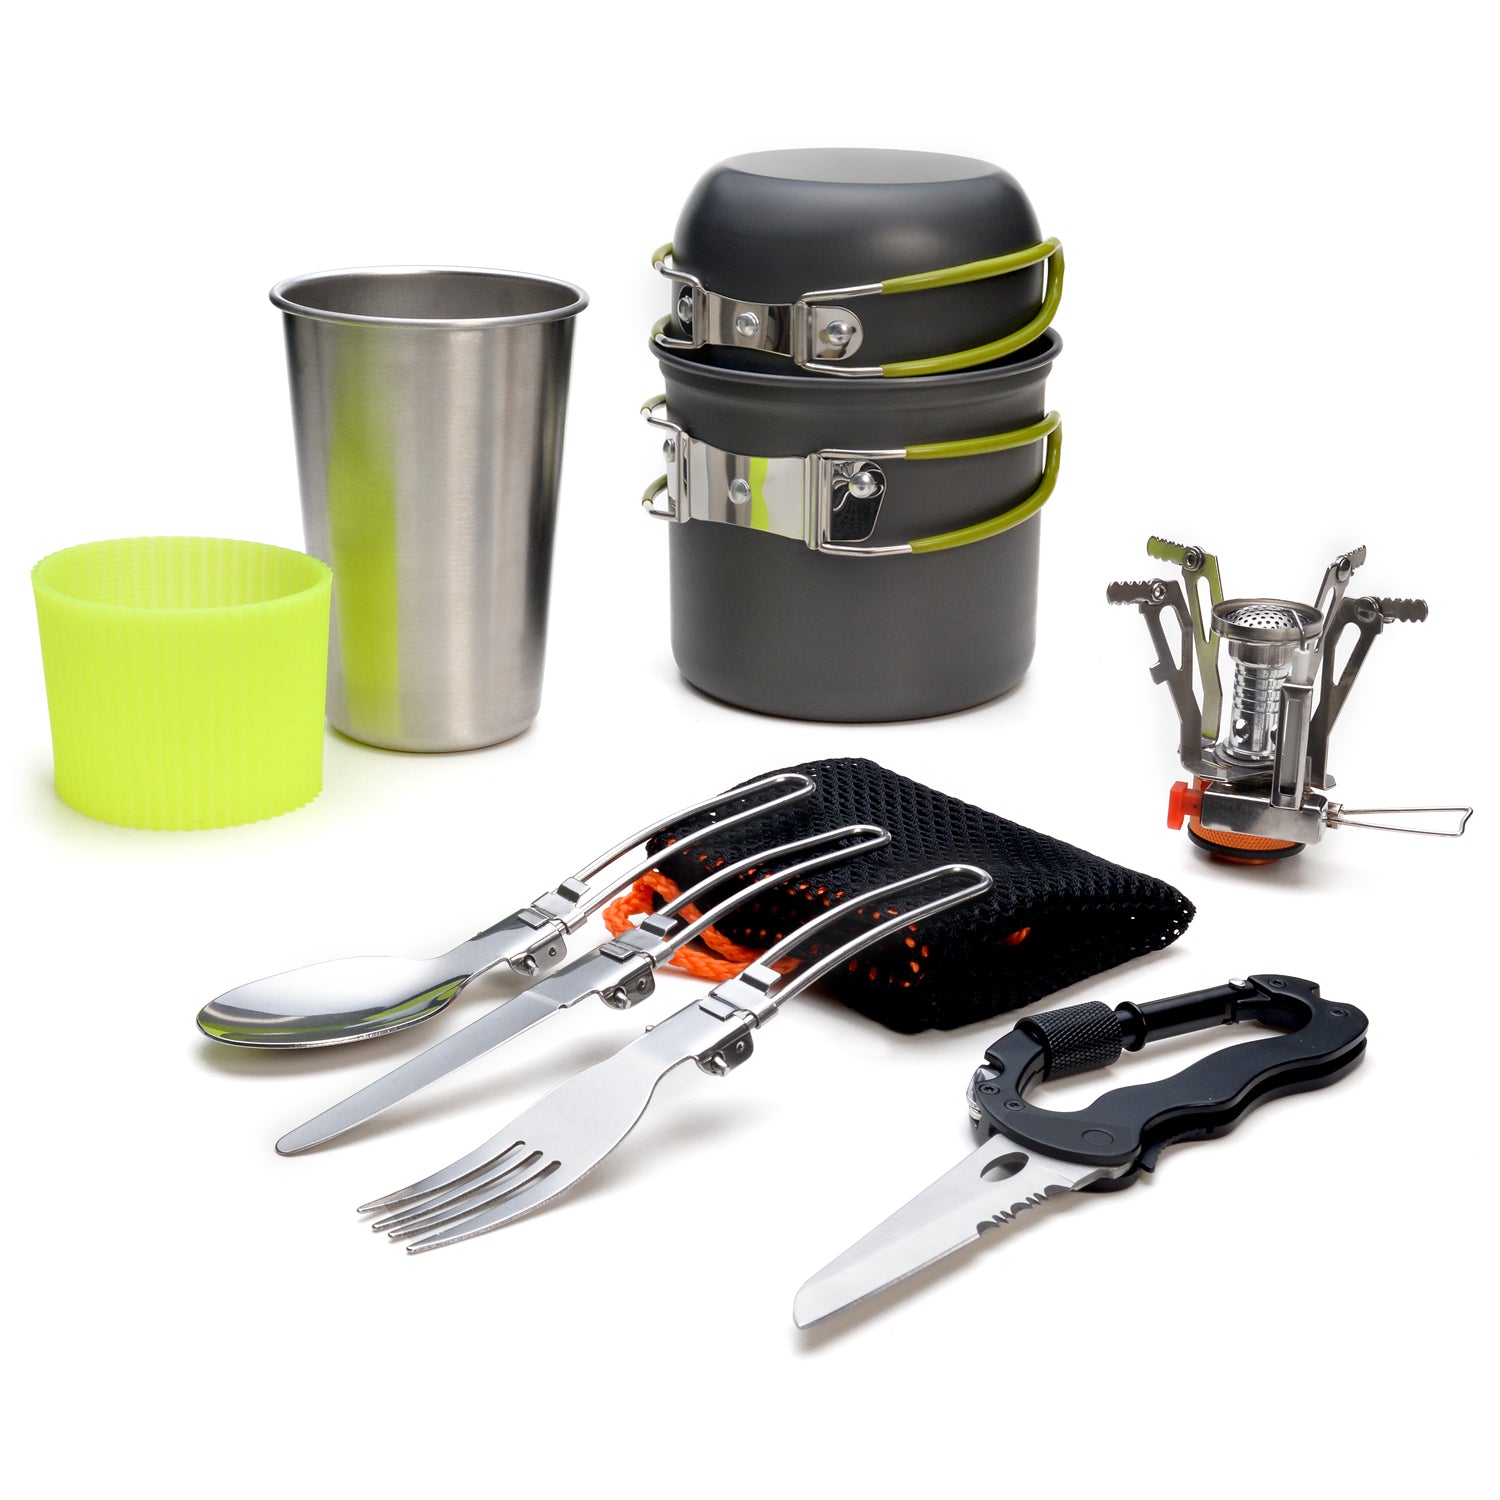 Odoland Camping Cookware Kit, Lightweight Portable Cookware Set with Water Cup, Fork Kit and Multi-functional Carabiner with Knife, Great for Backpacking, Outdoor Camping Hiking and Picnic